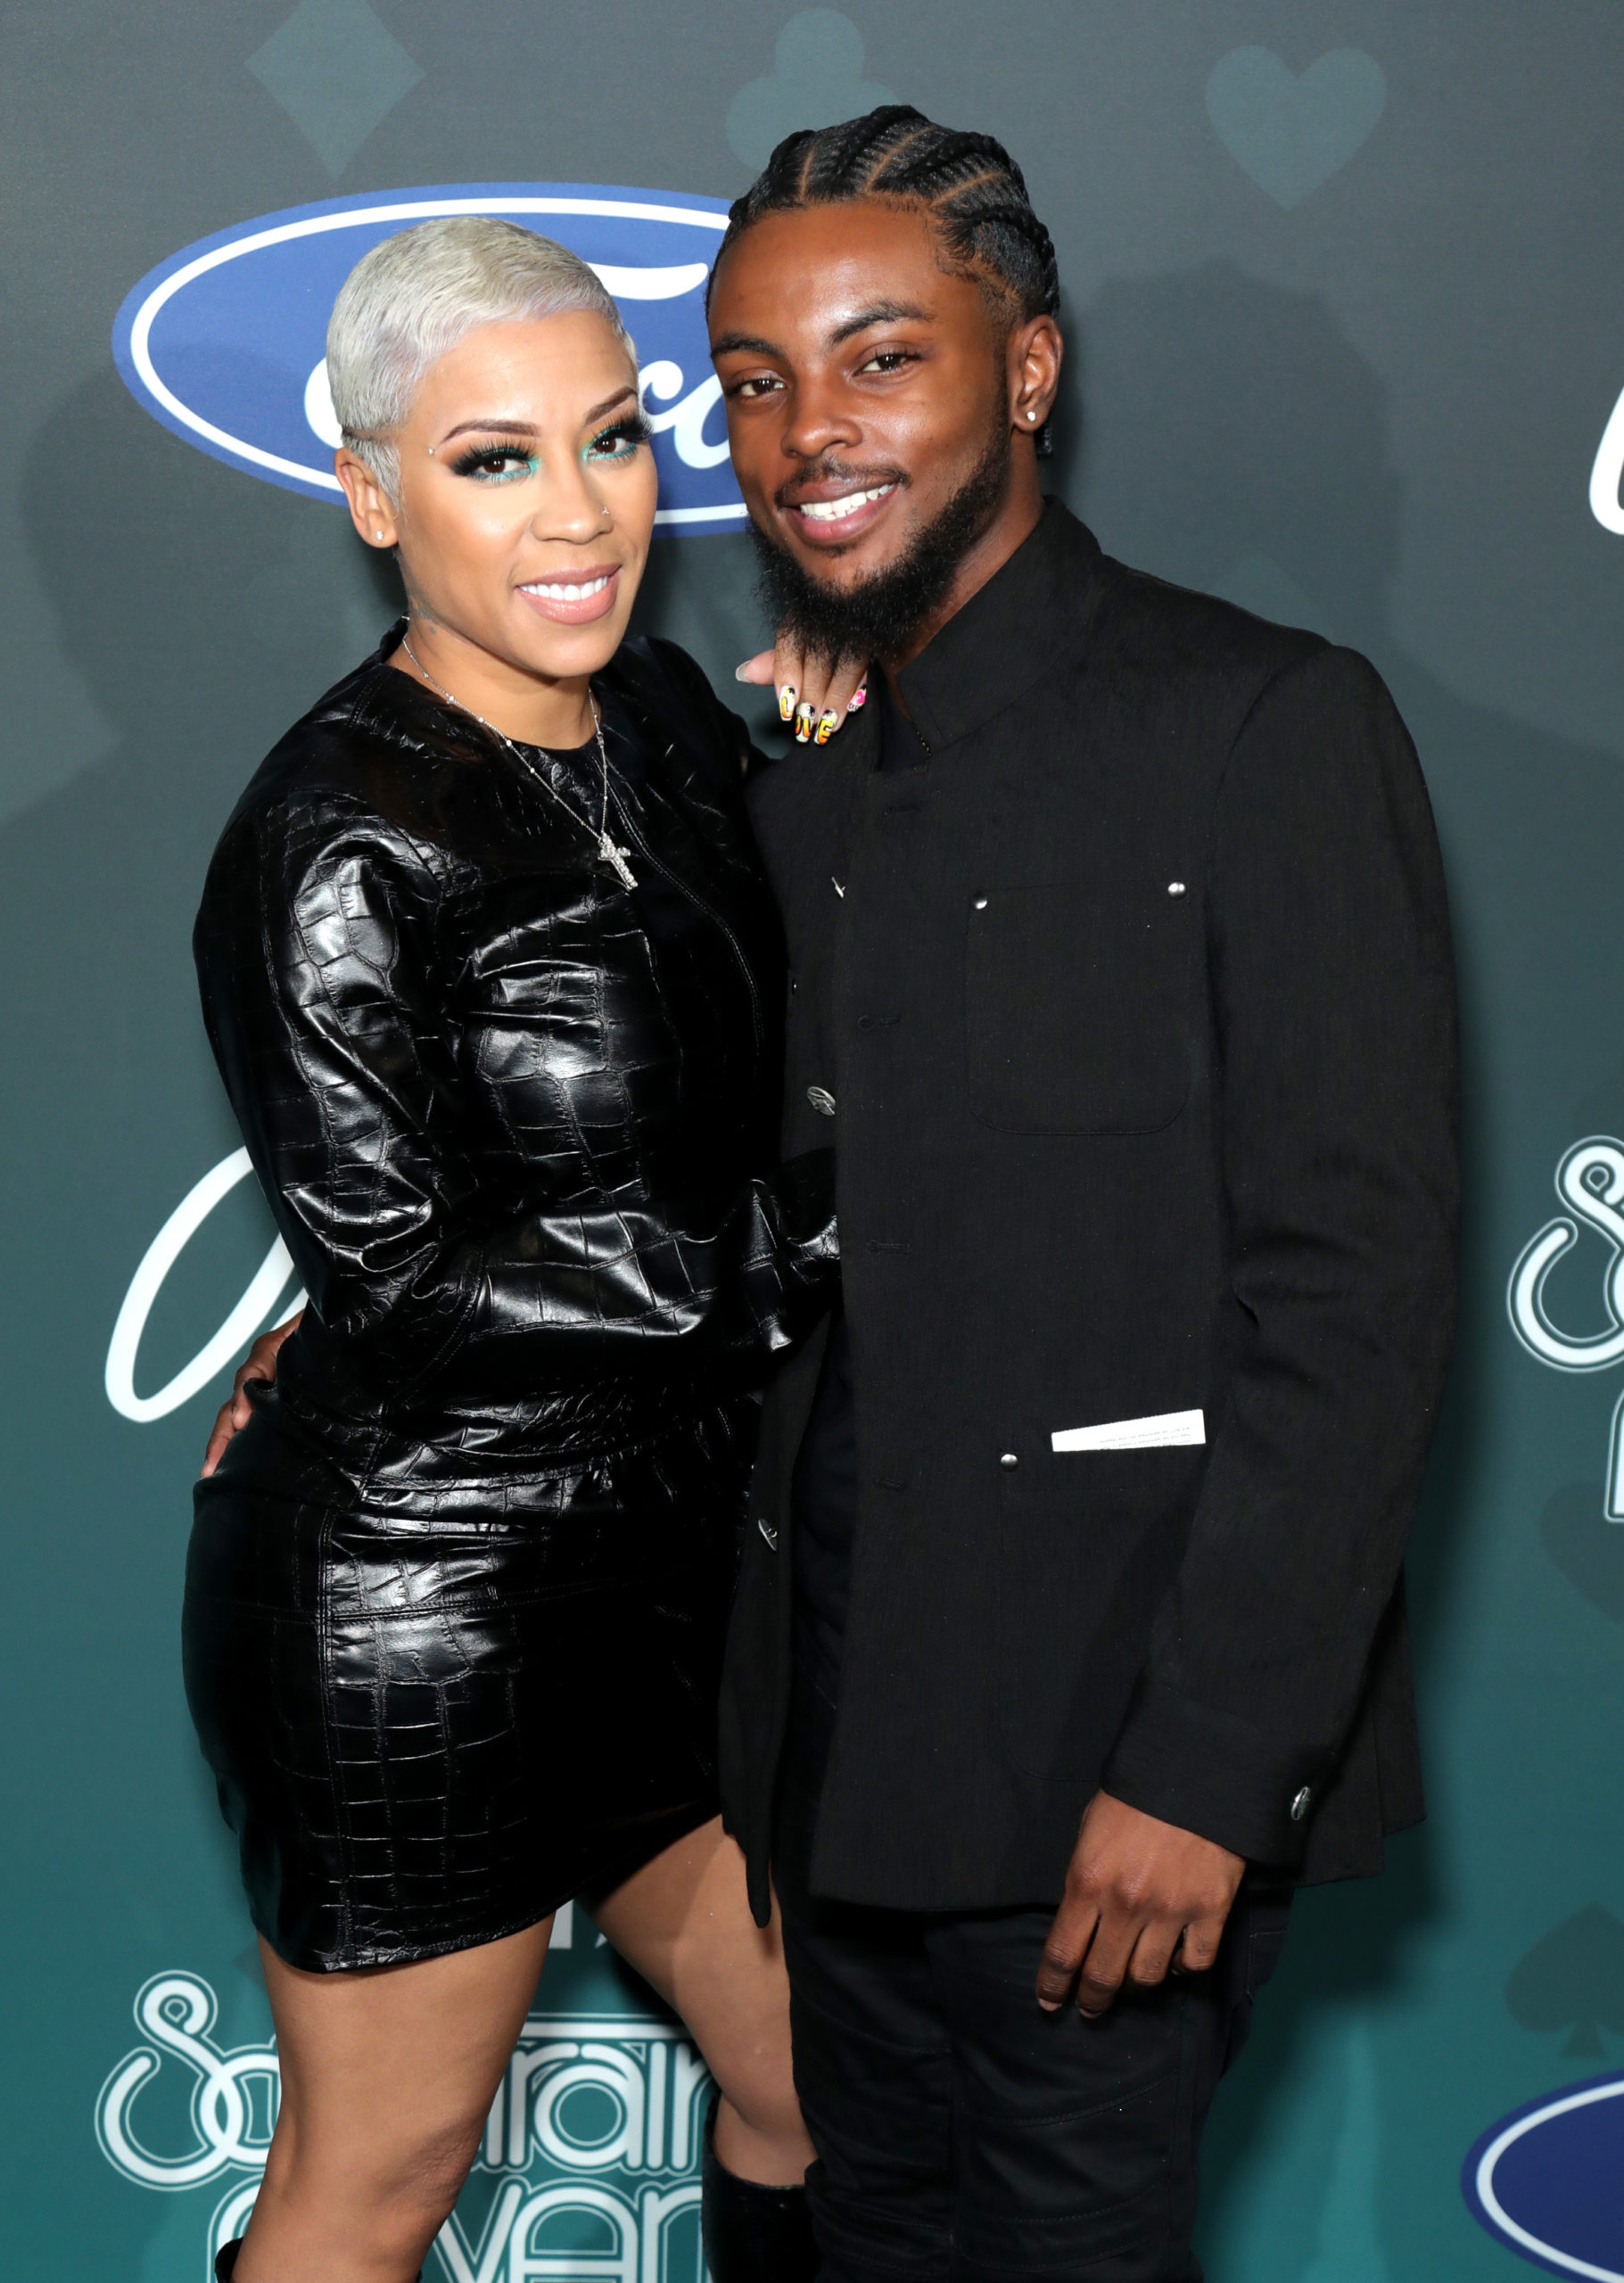 Cutest Baby Ever Keyshia Cole S Infant Son Steals The Spotlight In Heartwarming Video With Dad Niko Hale